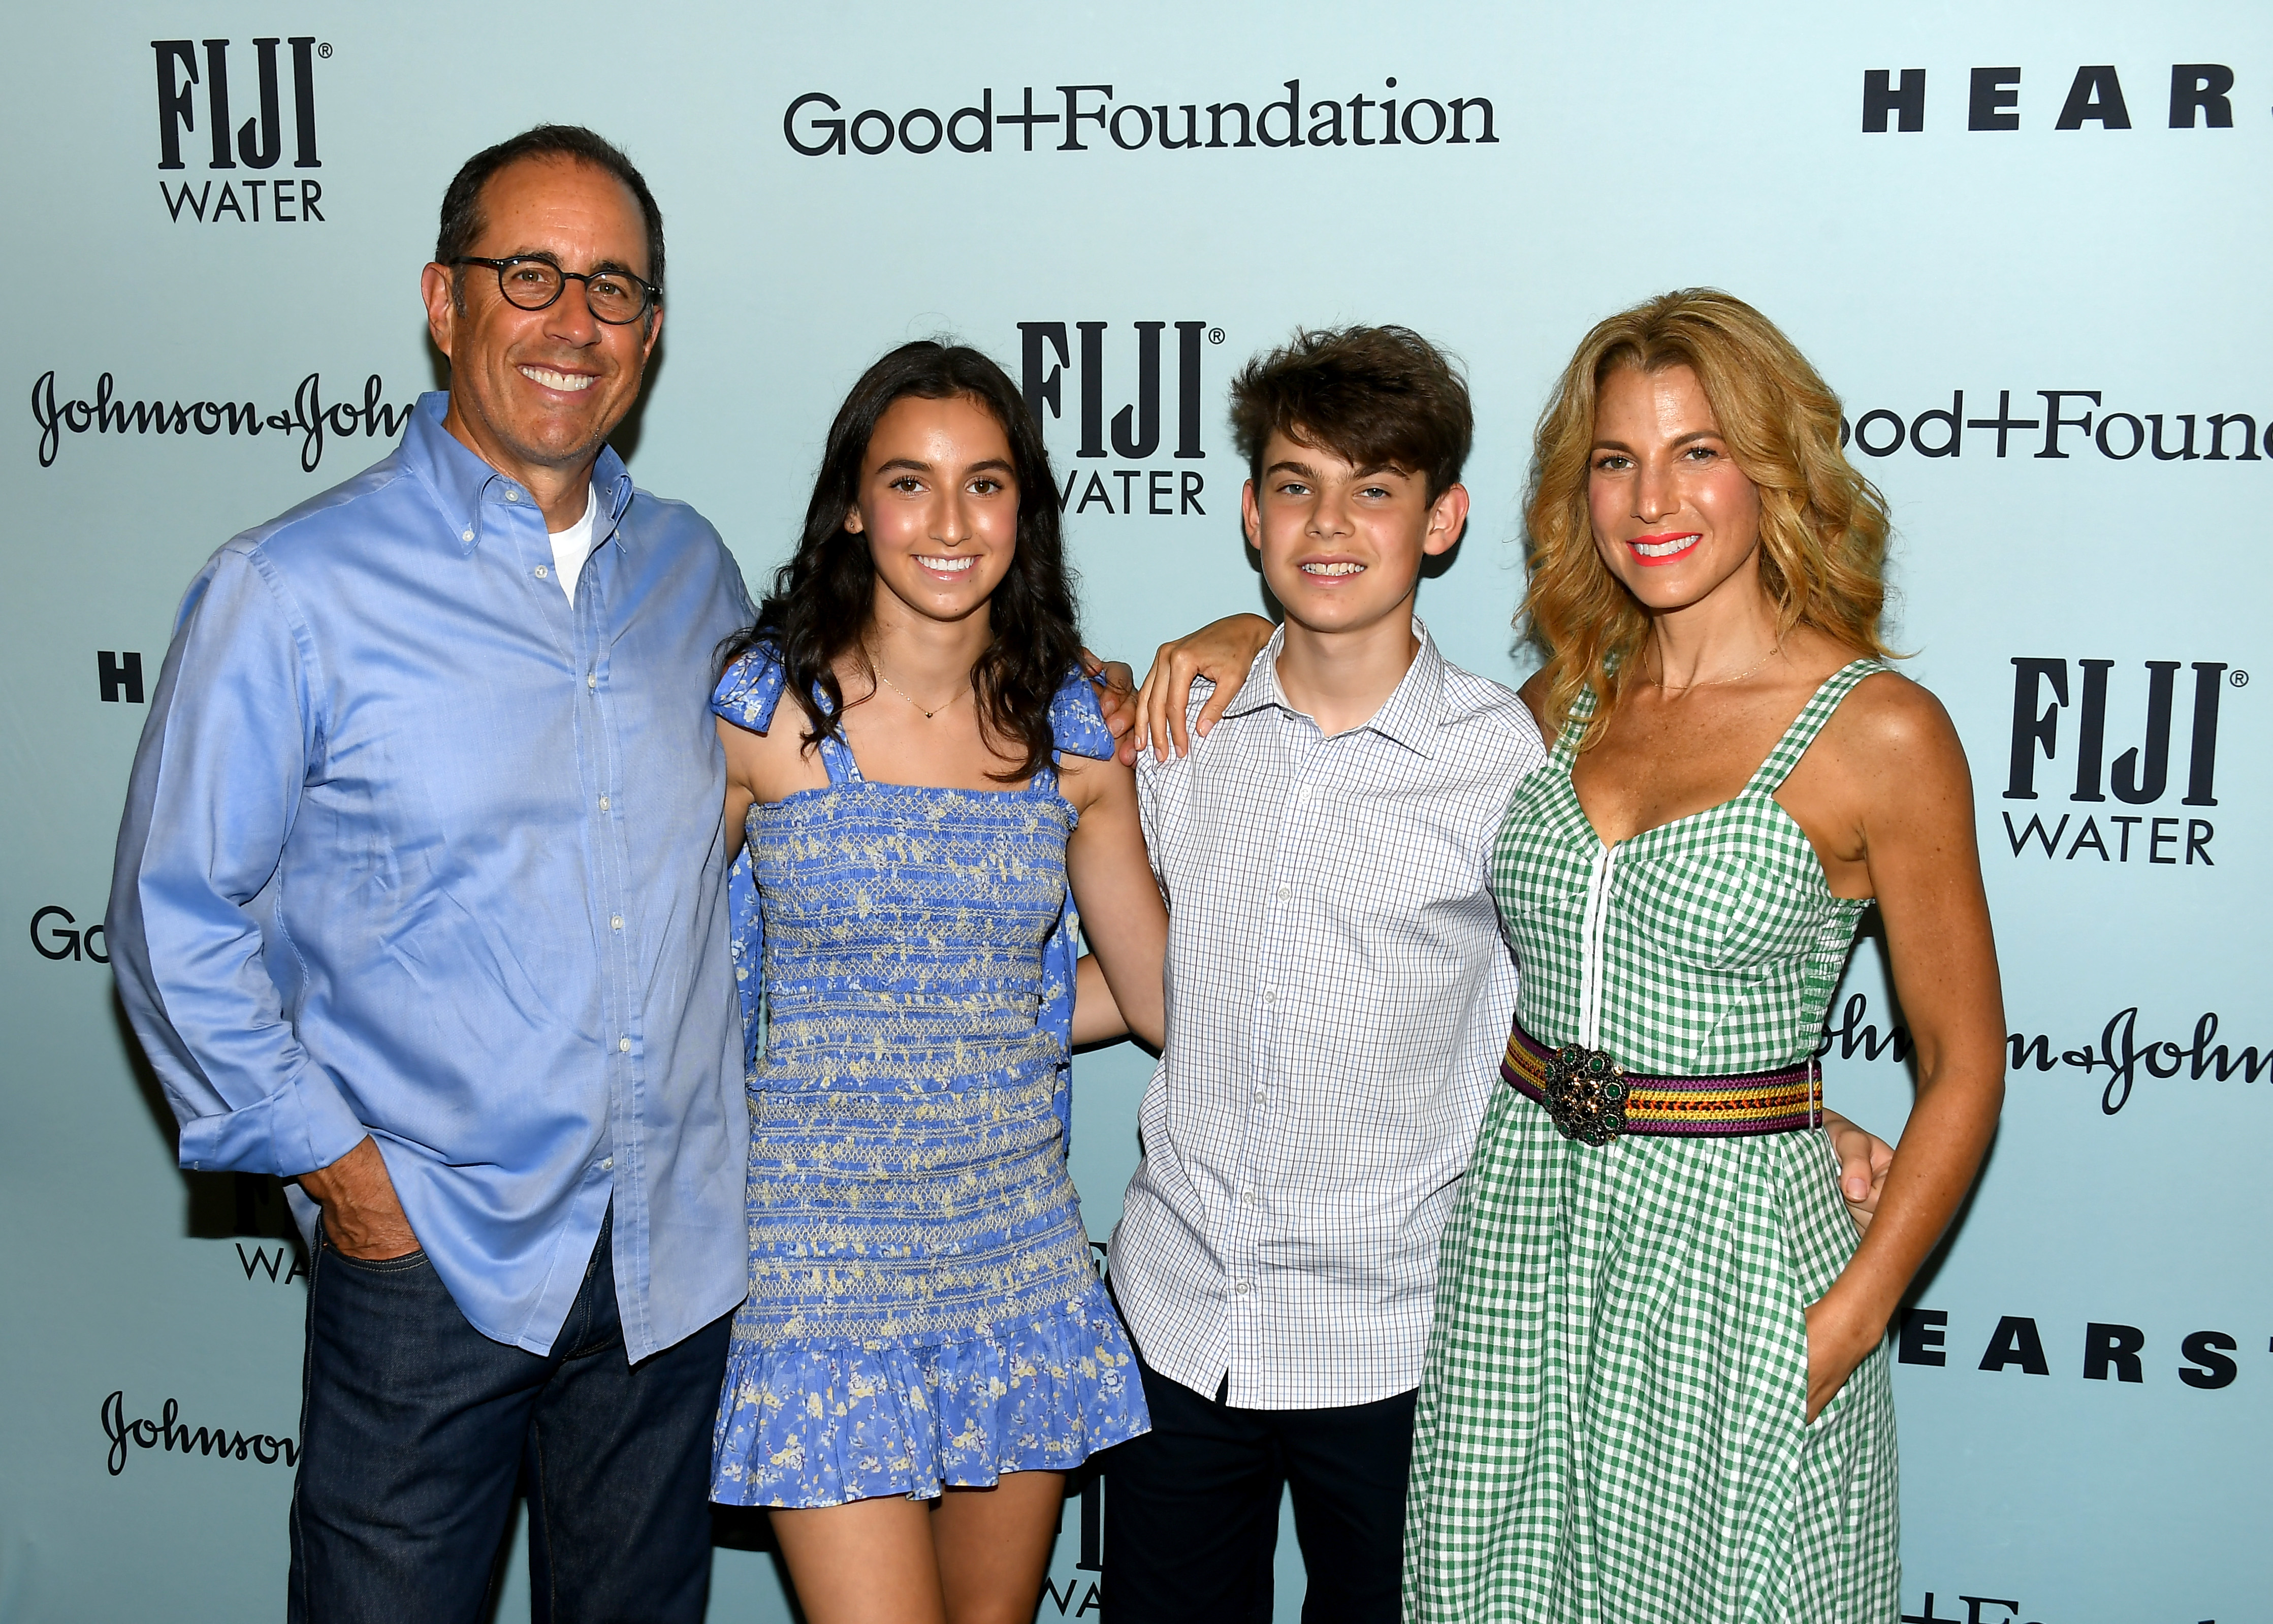 Jessica Seinfeld(R) is the founder of Good+ Foundation